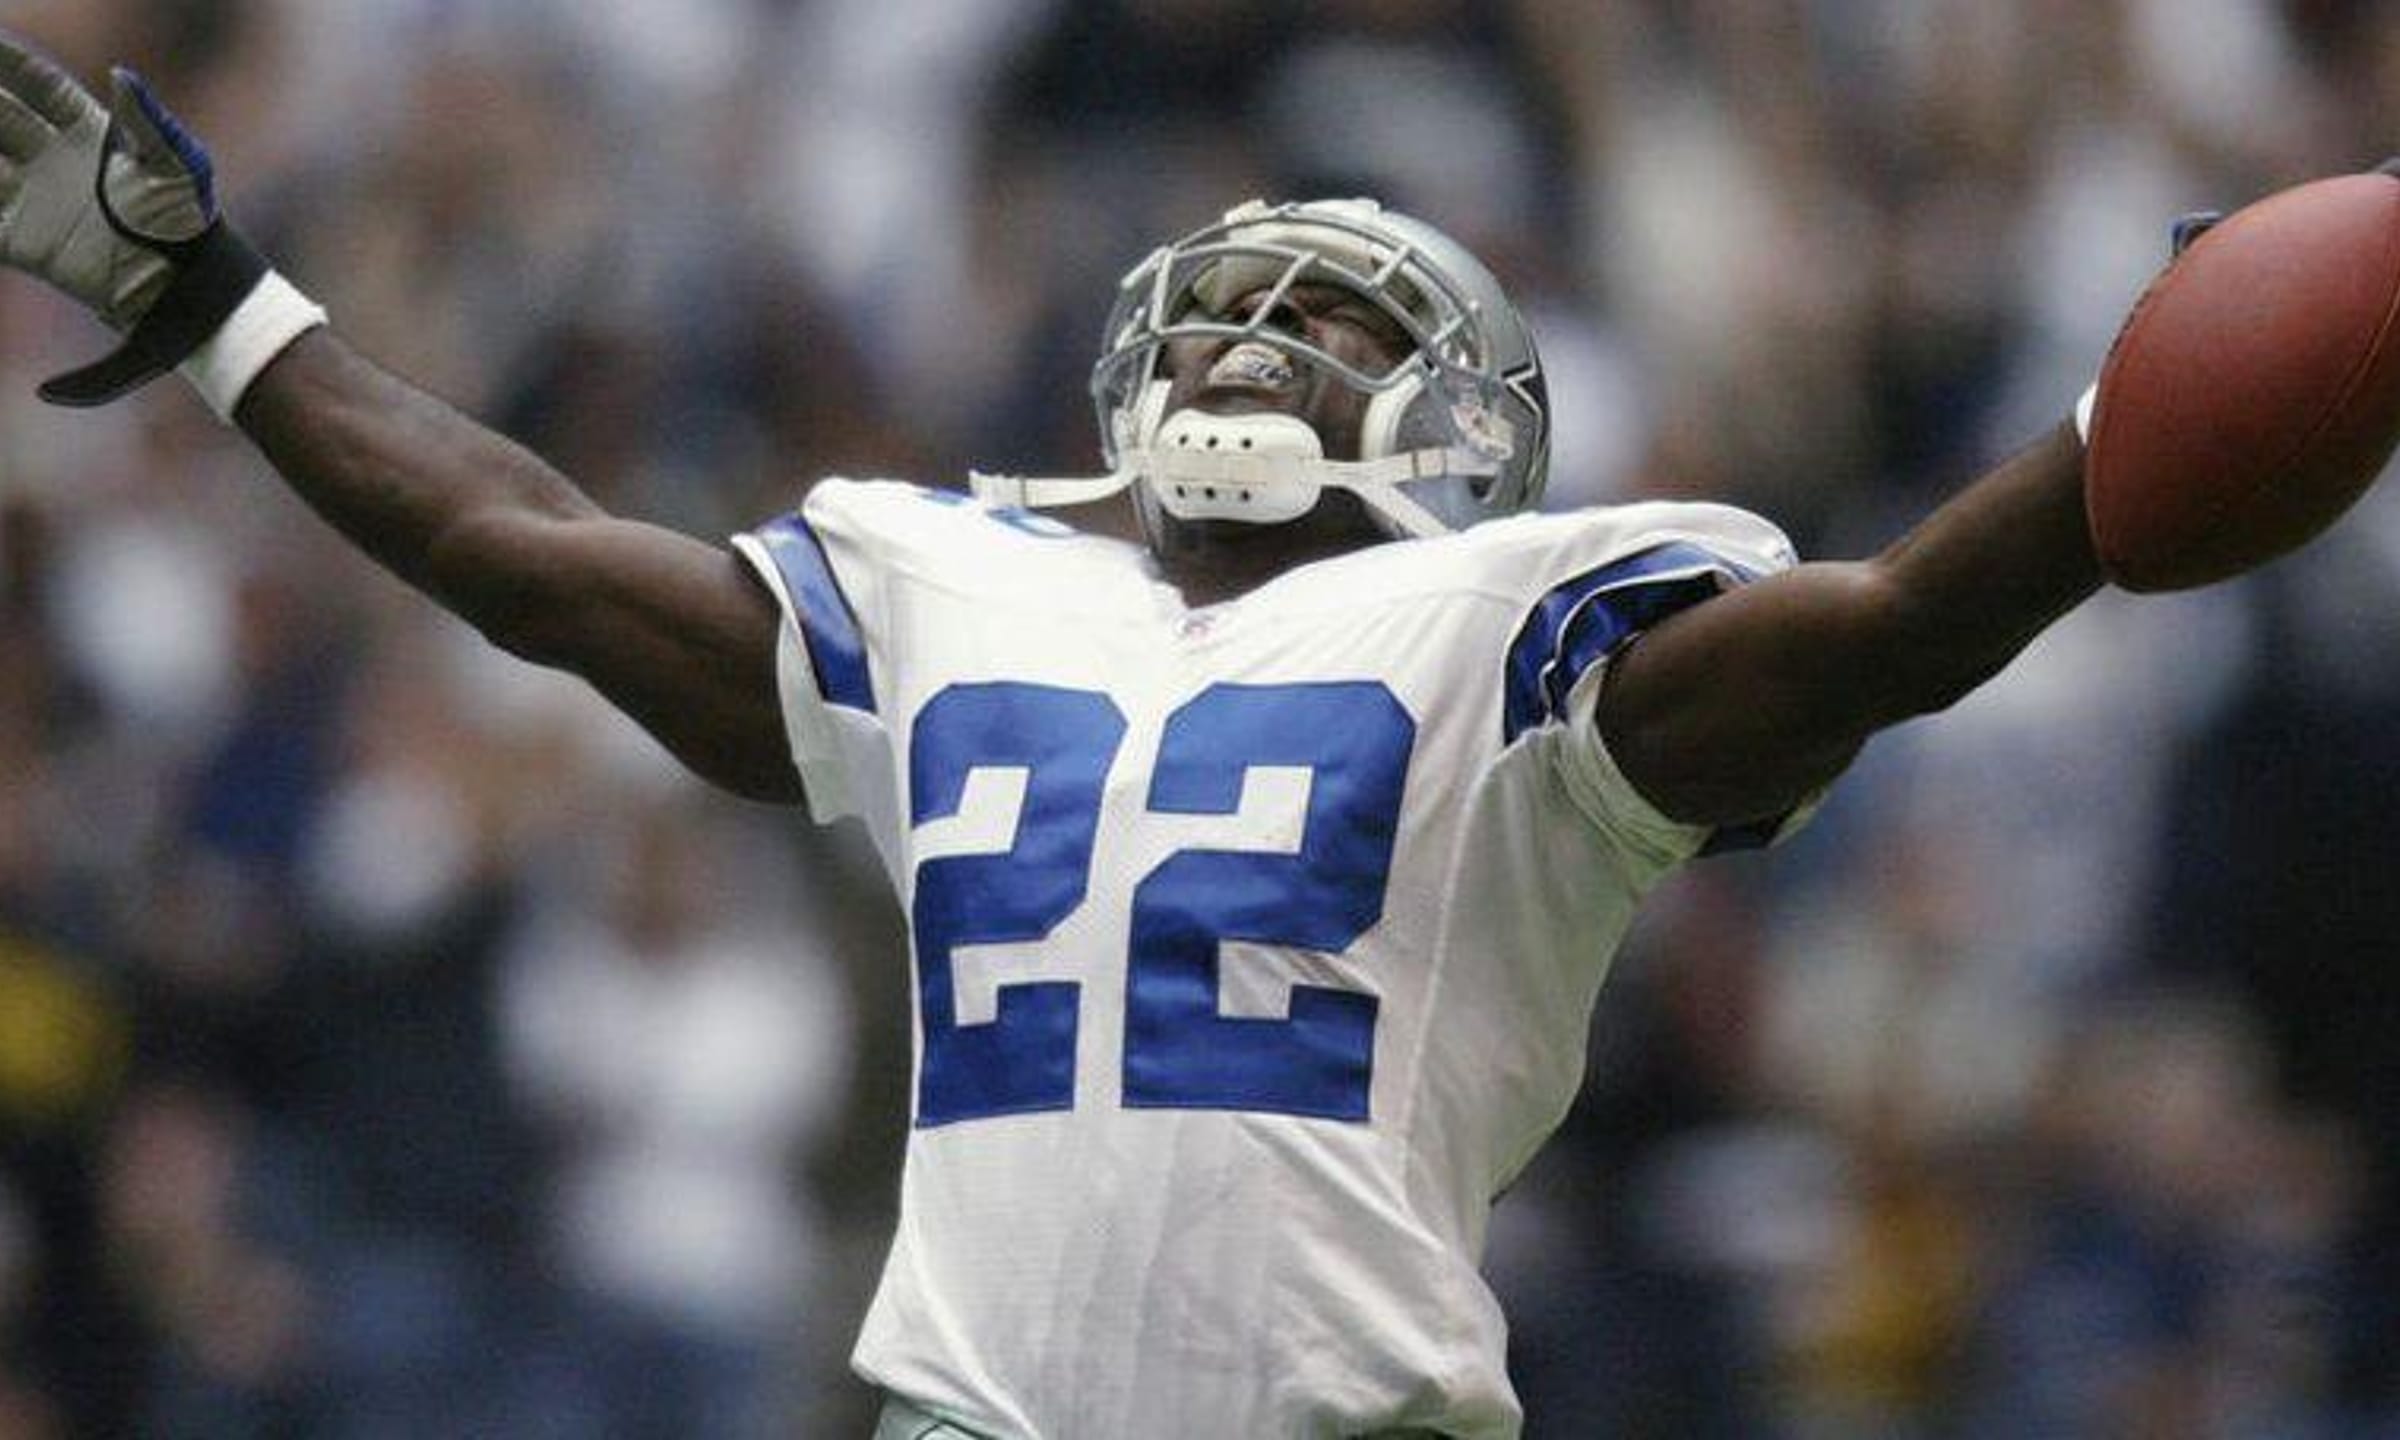 The top 25 Dallas Cowboys players of all time